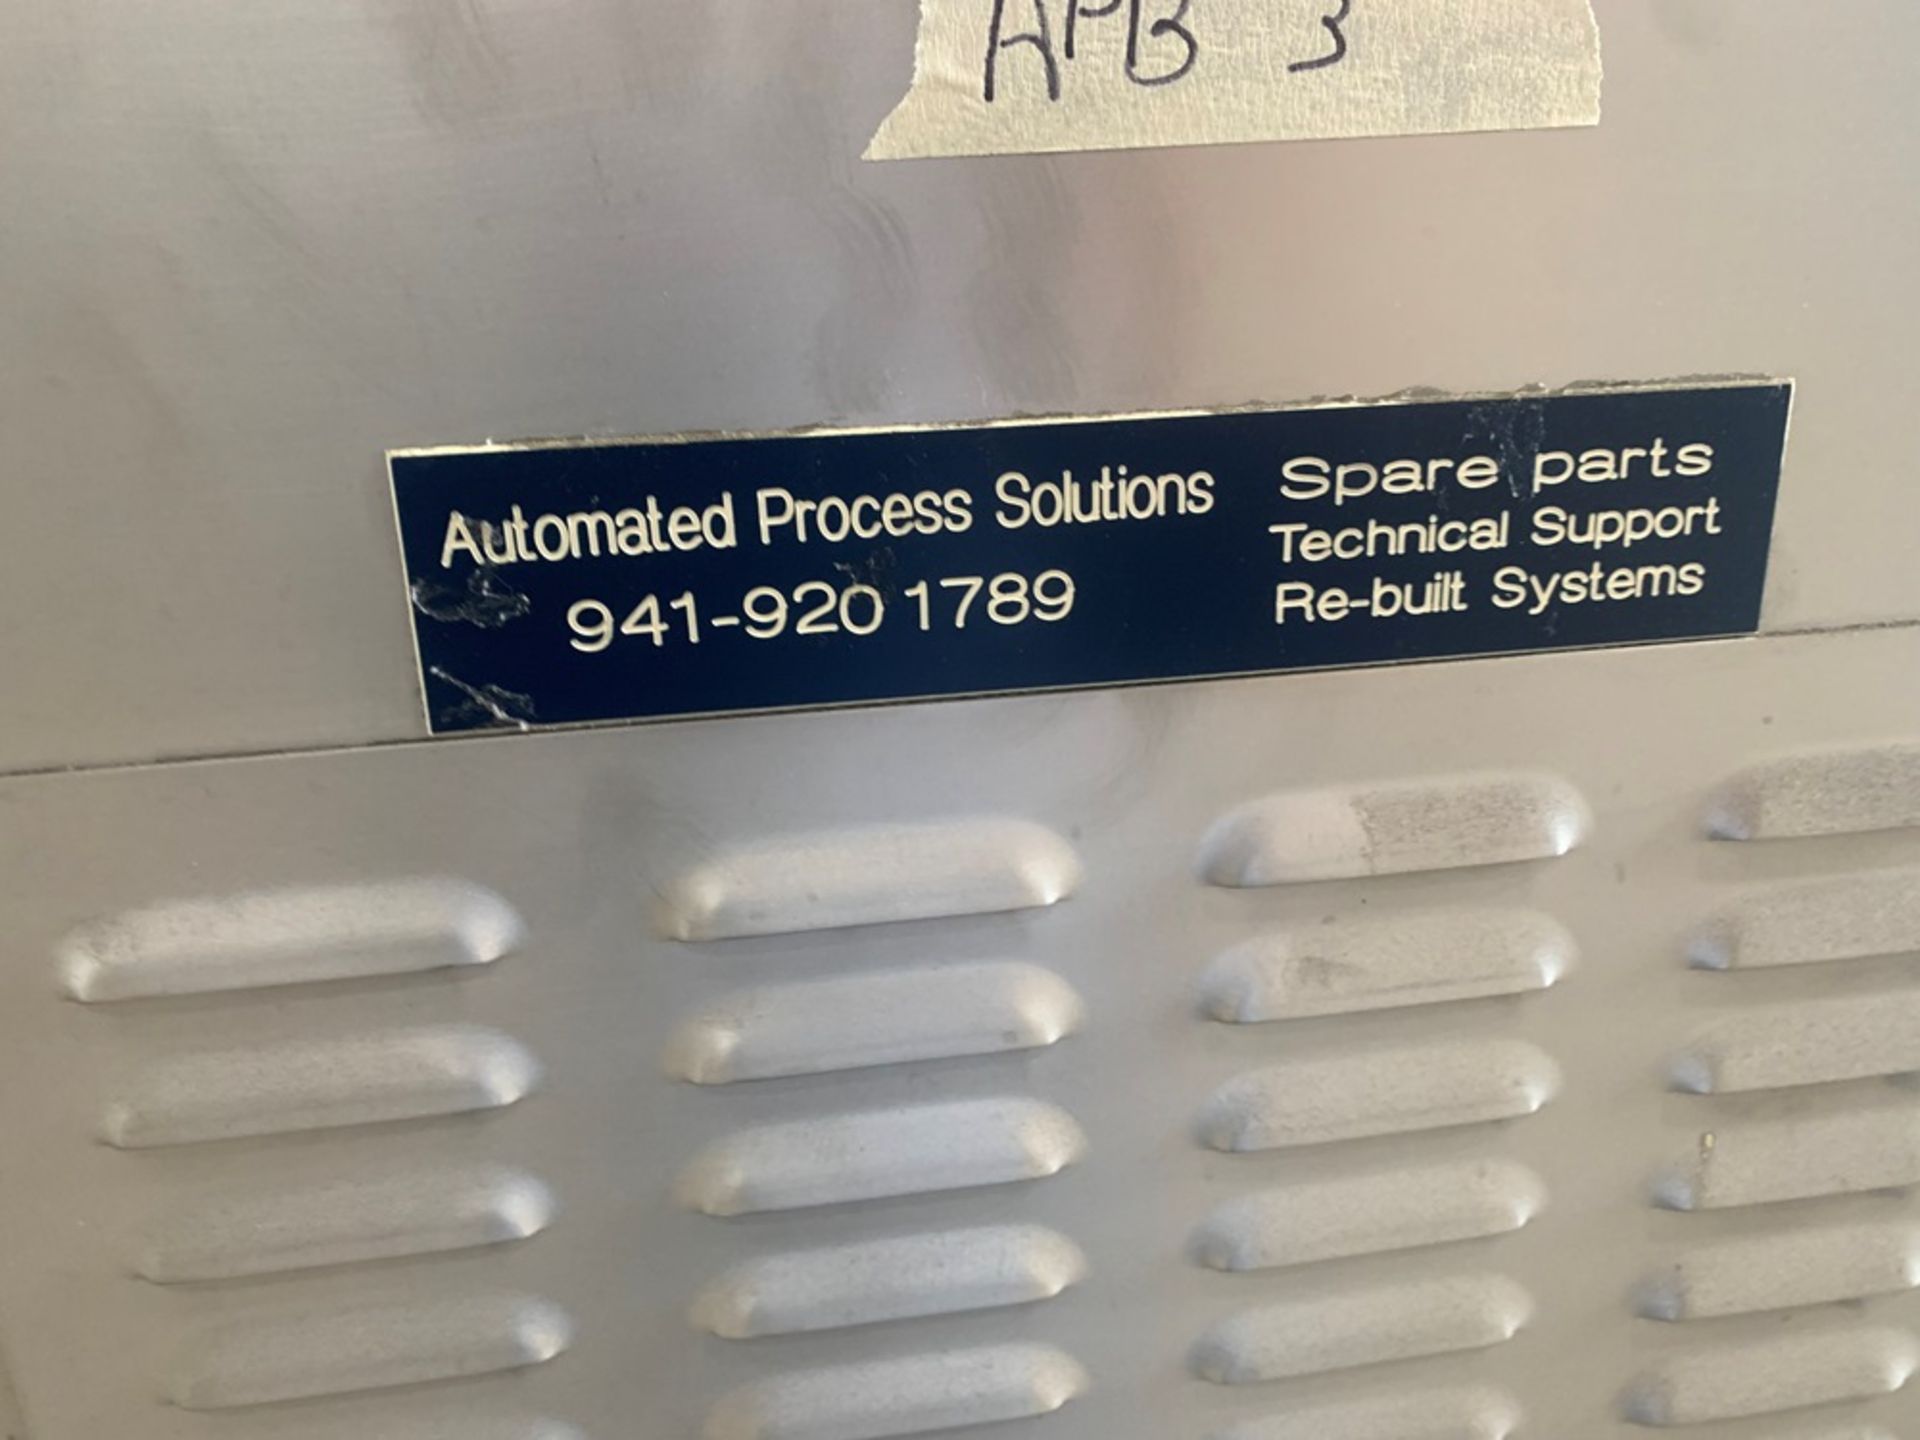 AEW Saw/Slicer, Ser. #60990089, appears to have been refurbished by Automated Process Solutions - Image 6 of 11